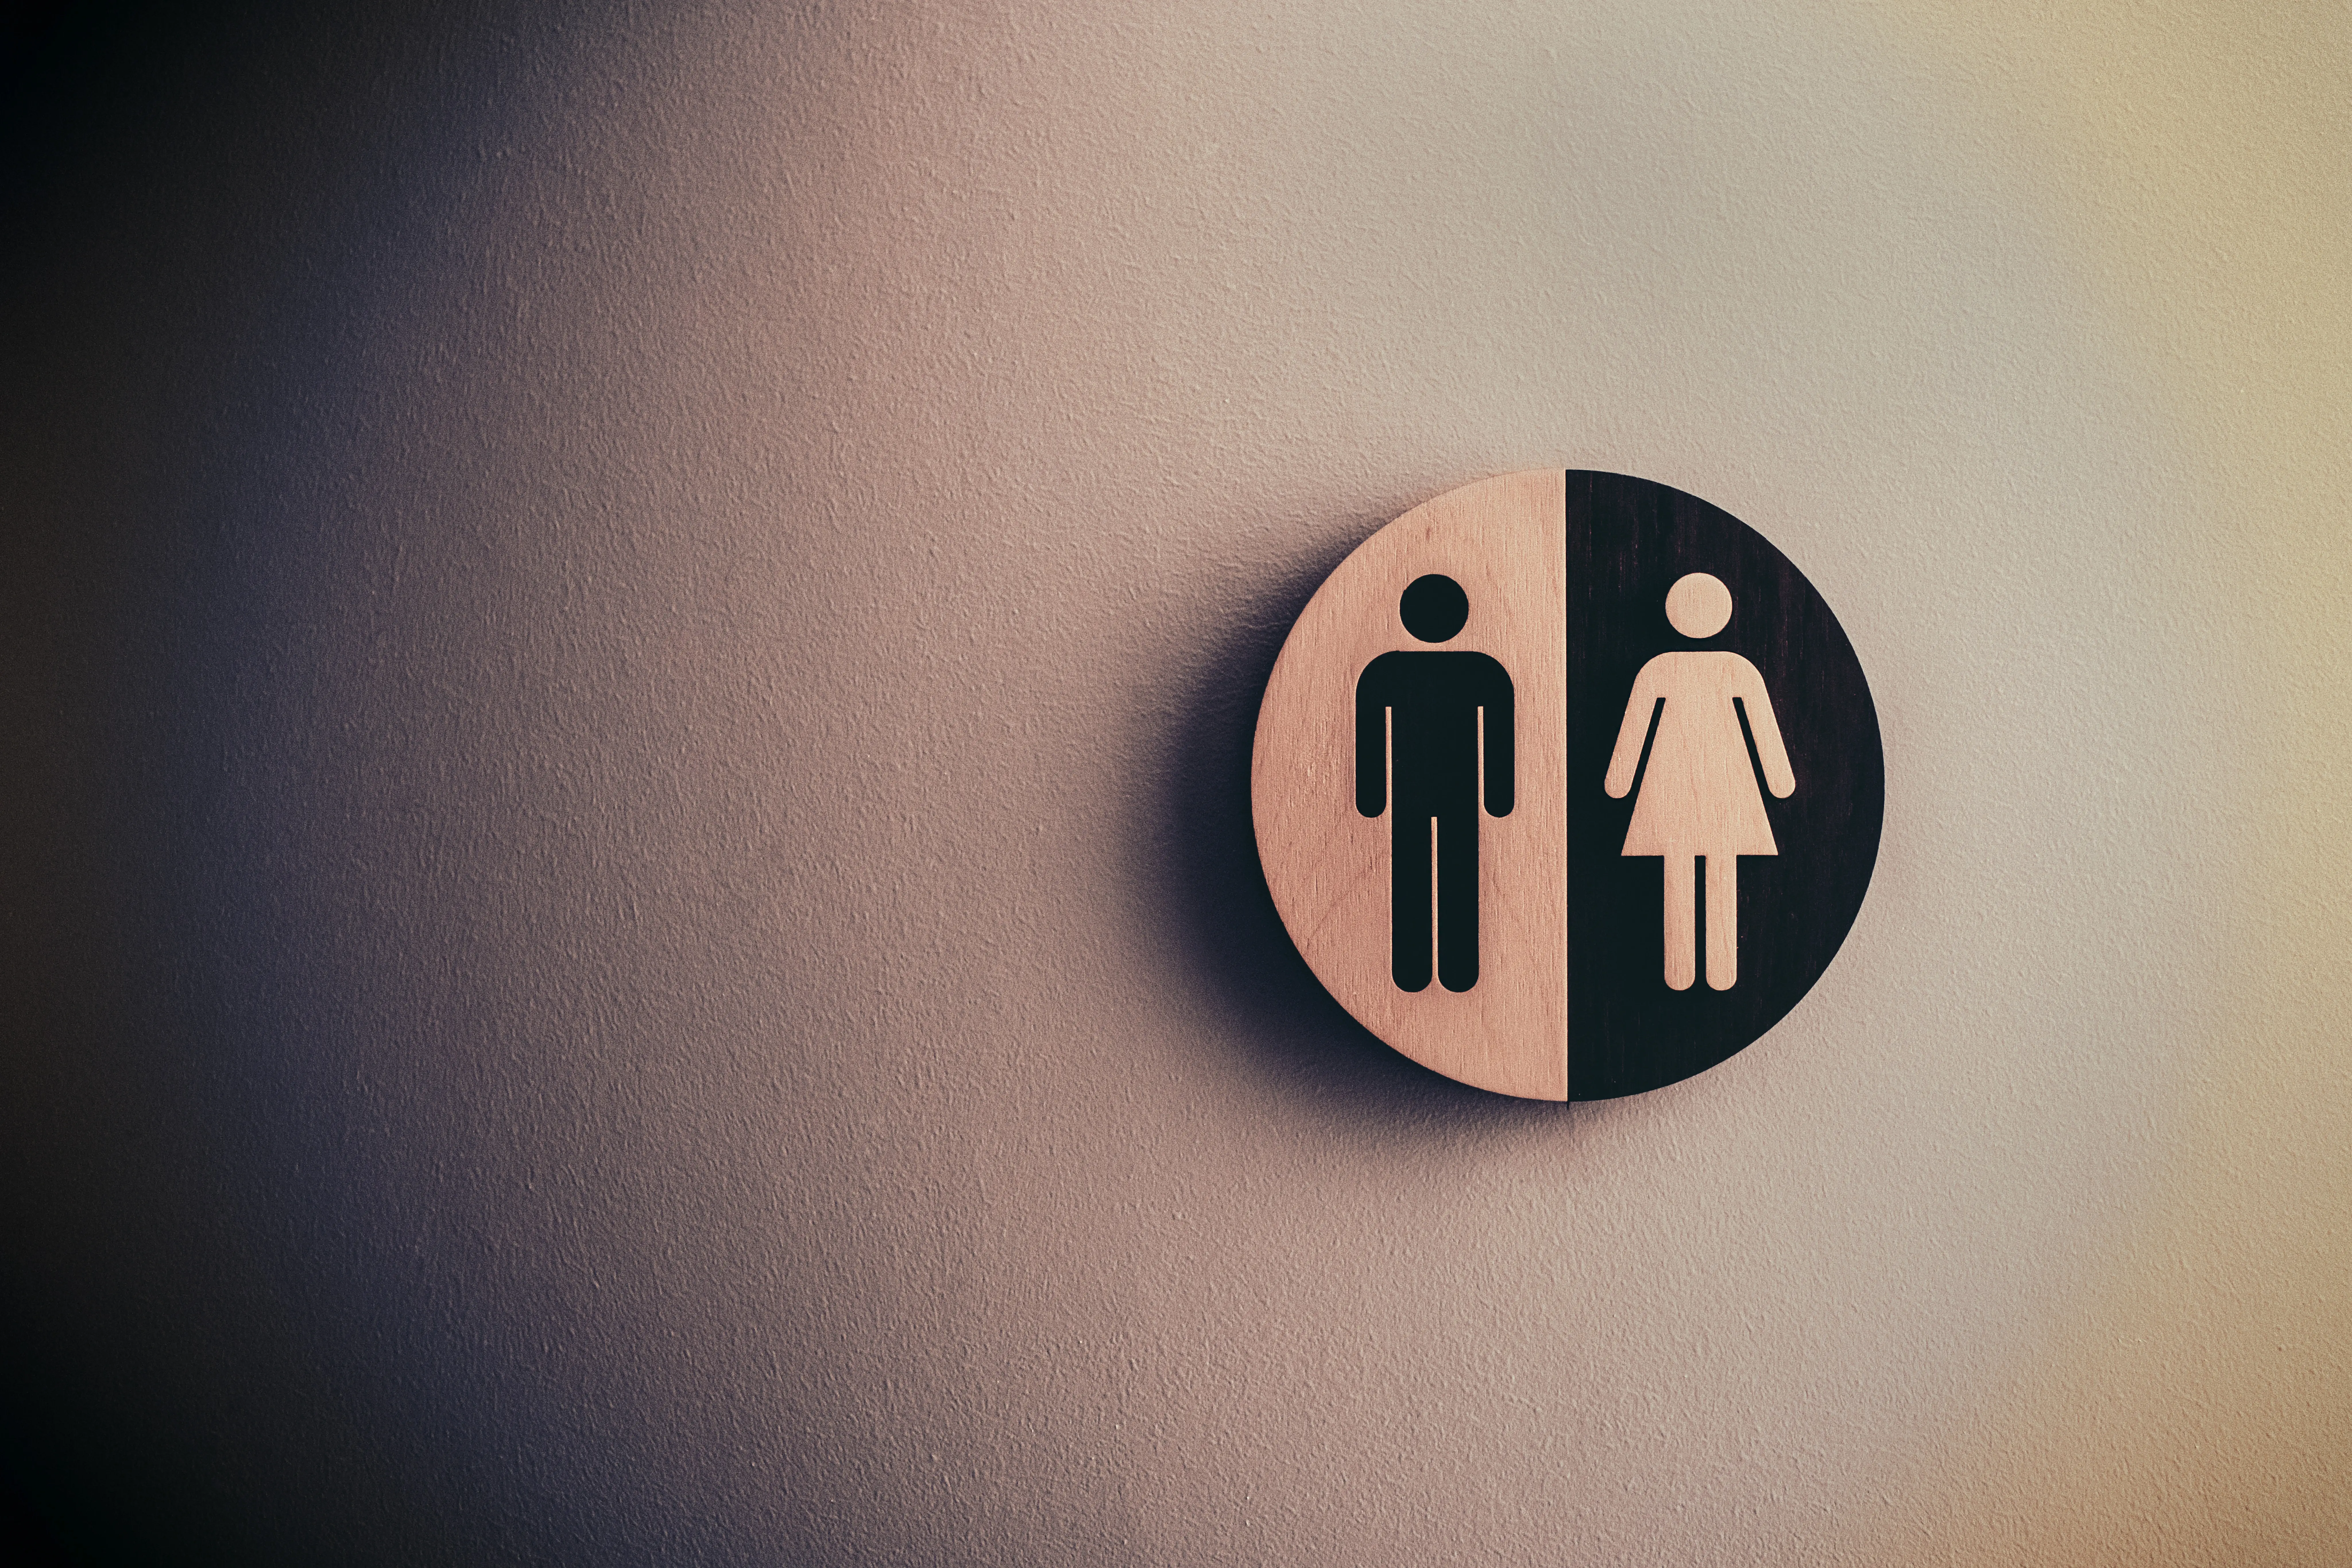 Bathroom Sign with Male and Female Symbols